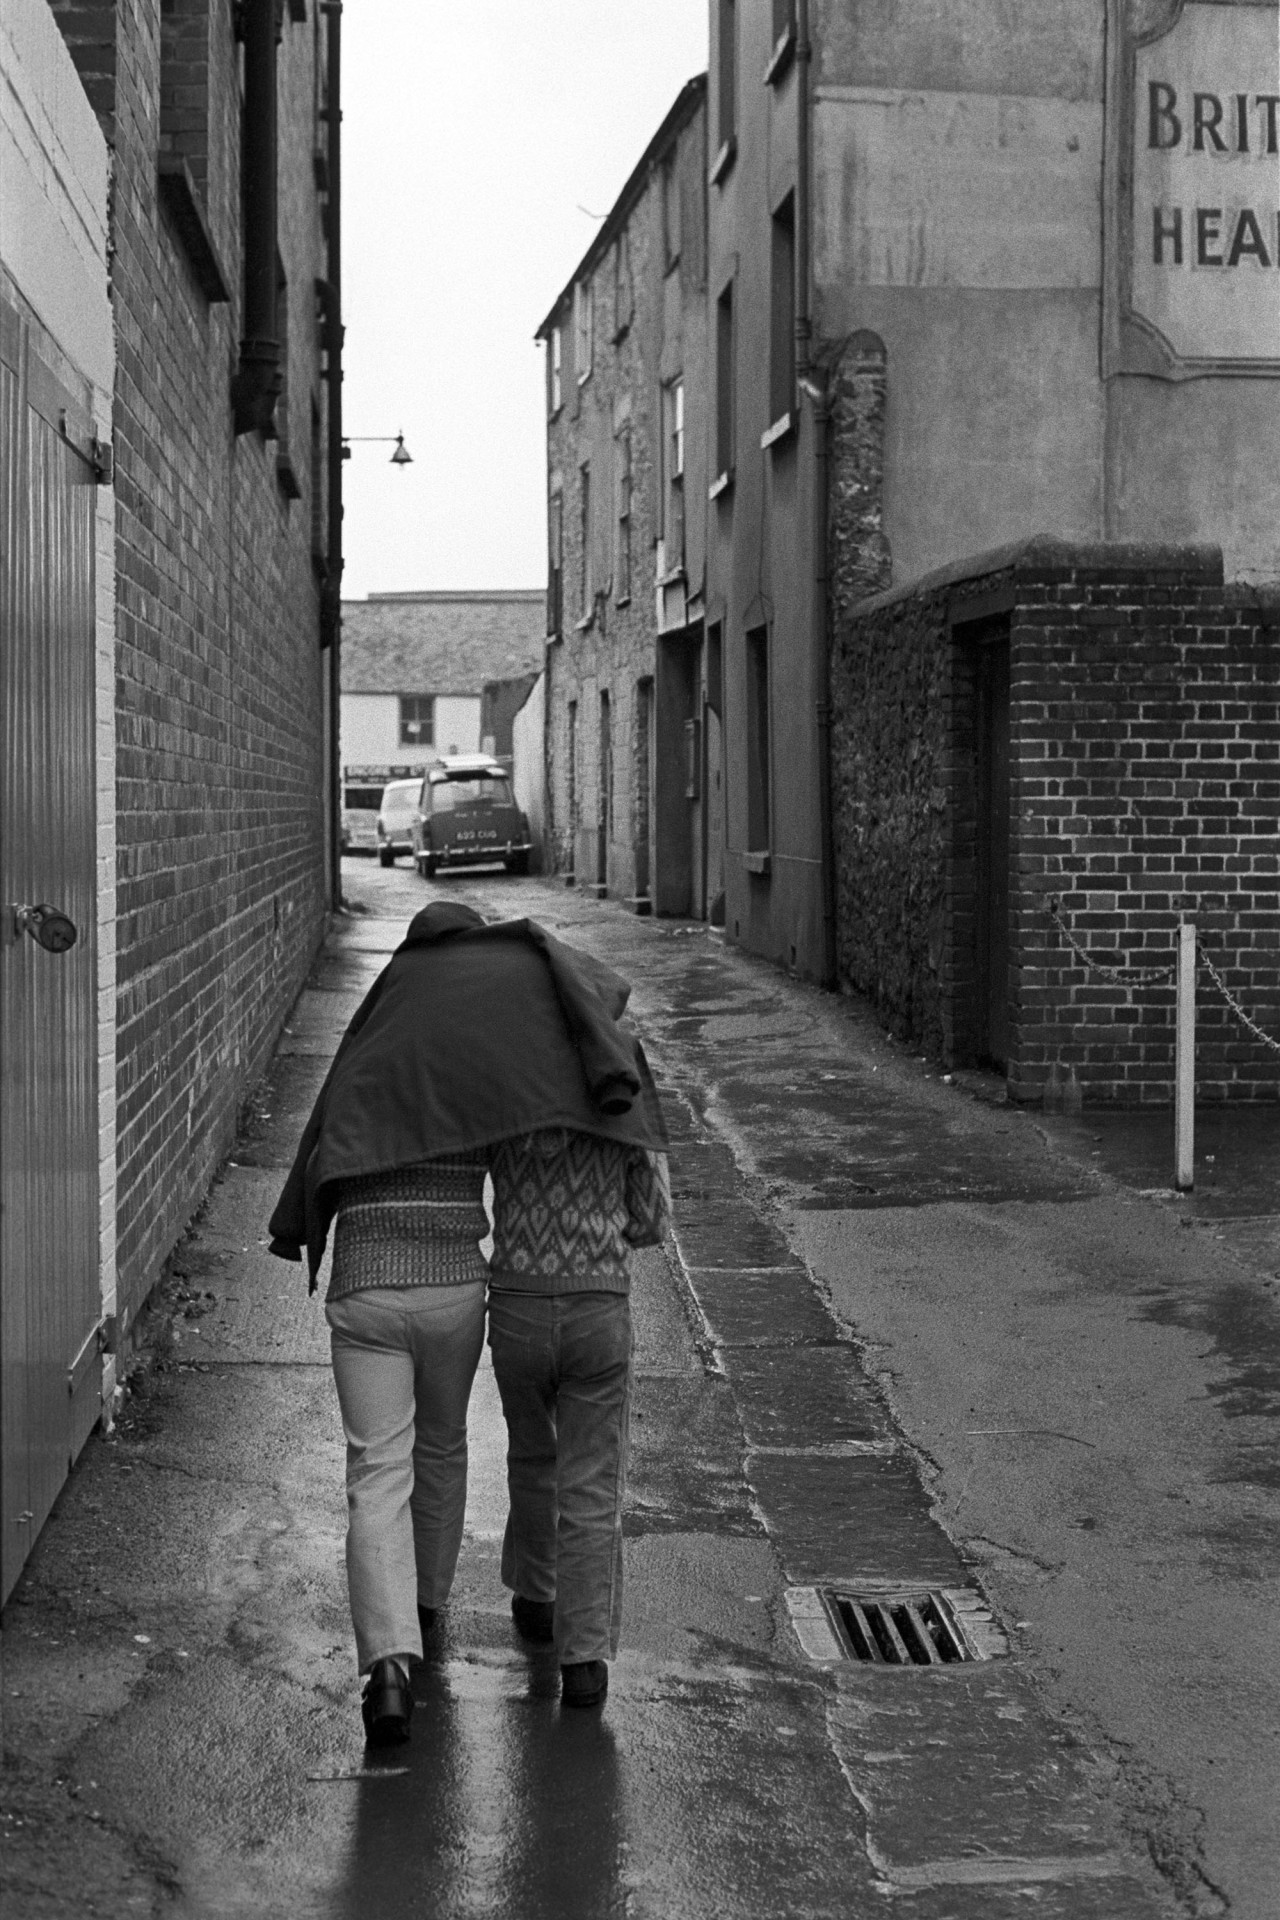 Backstreet with two children.
[Two people walking along a backstreet, huddled under a coat, in Bideford.]